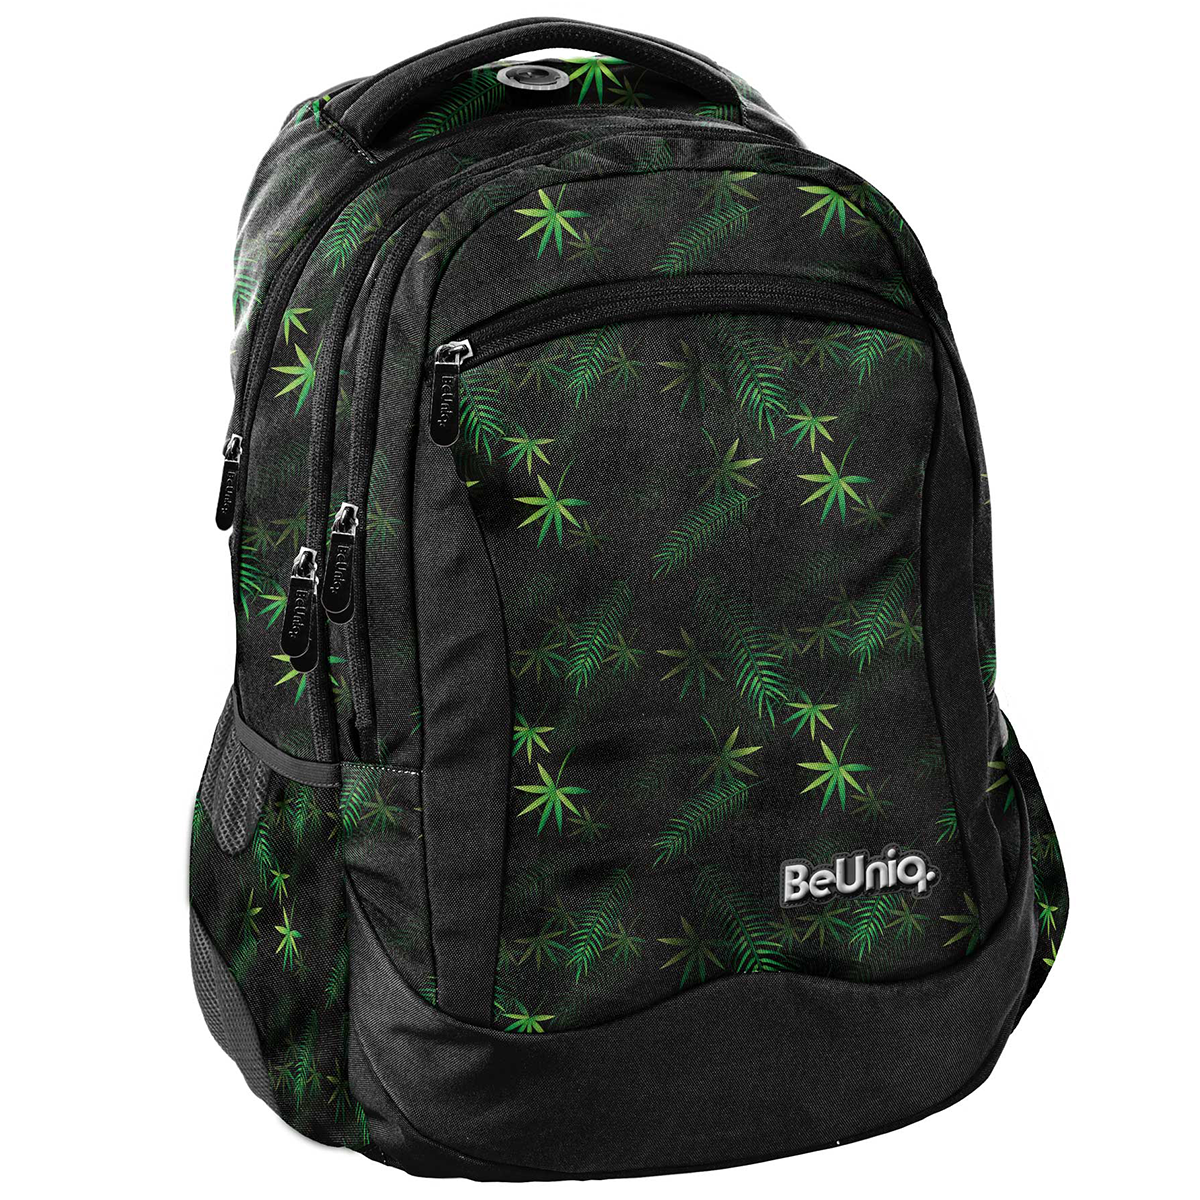 BeUniq Backpack, Jungle Leaves - 41 x 30 x 20 cm - Polyester